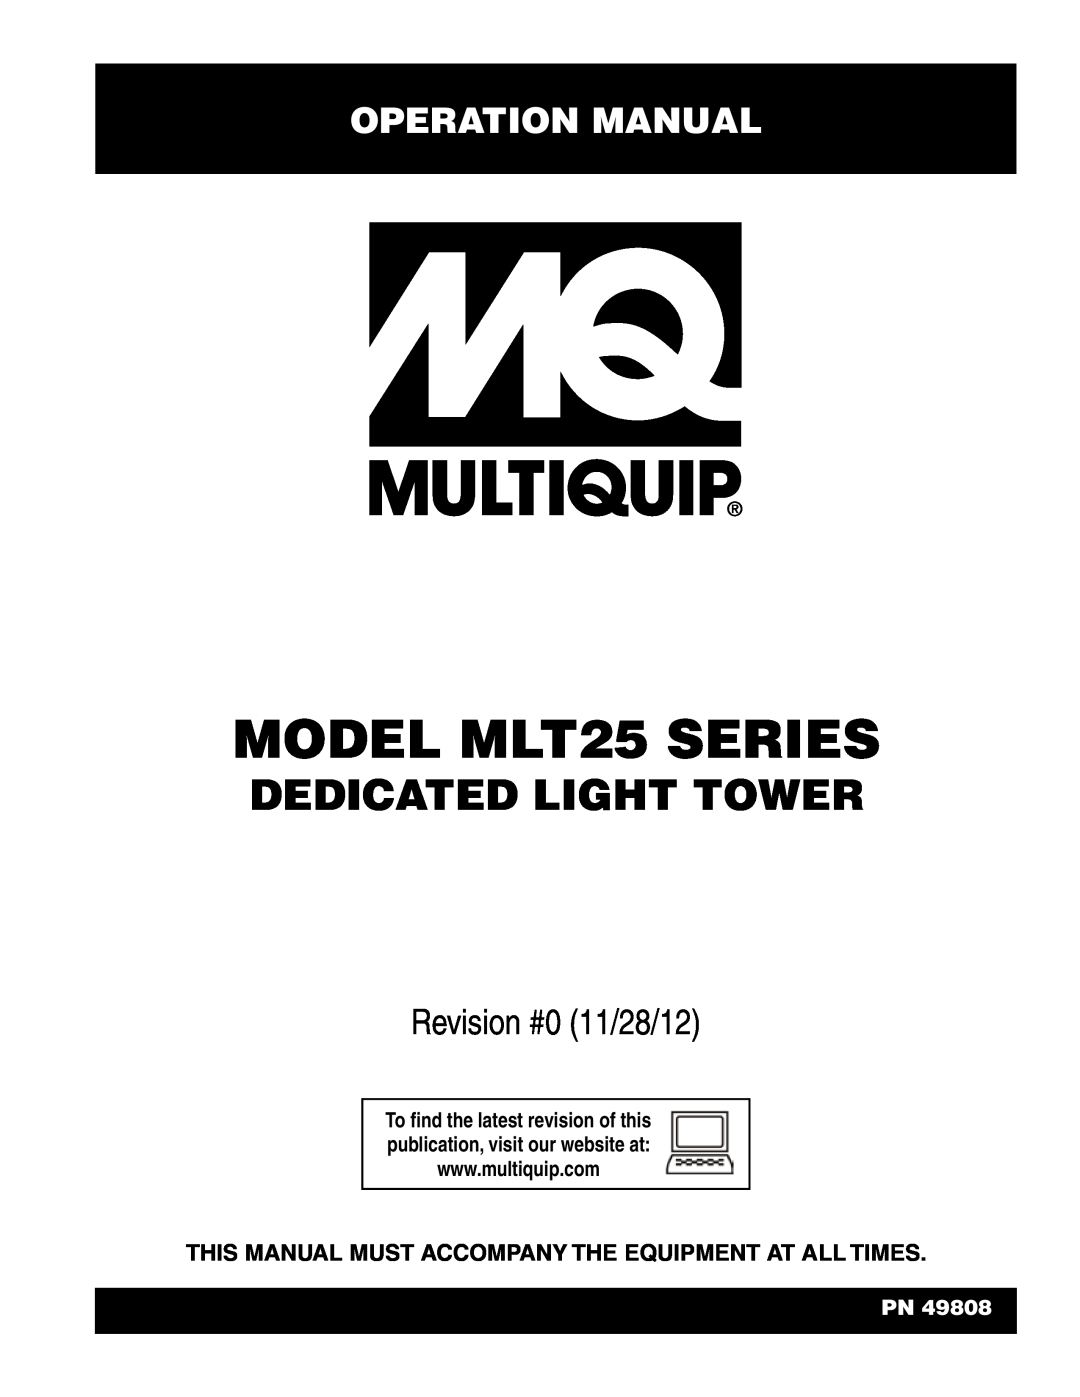 Multiquip MLT25 operation manual Operation Manual, This Manual Must Accompany The Equipment At All Times 